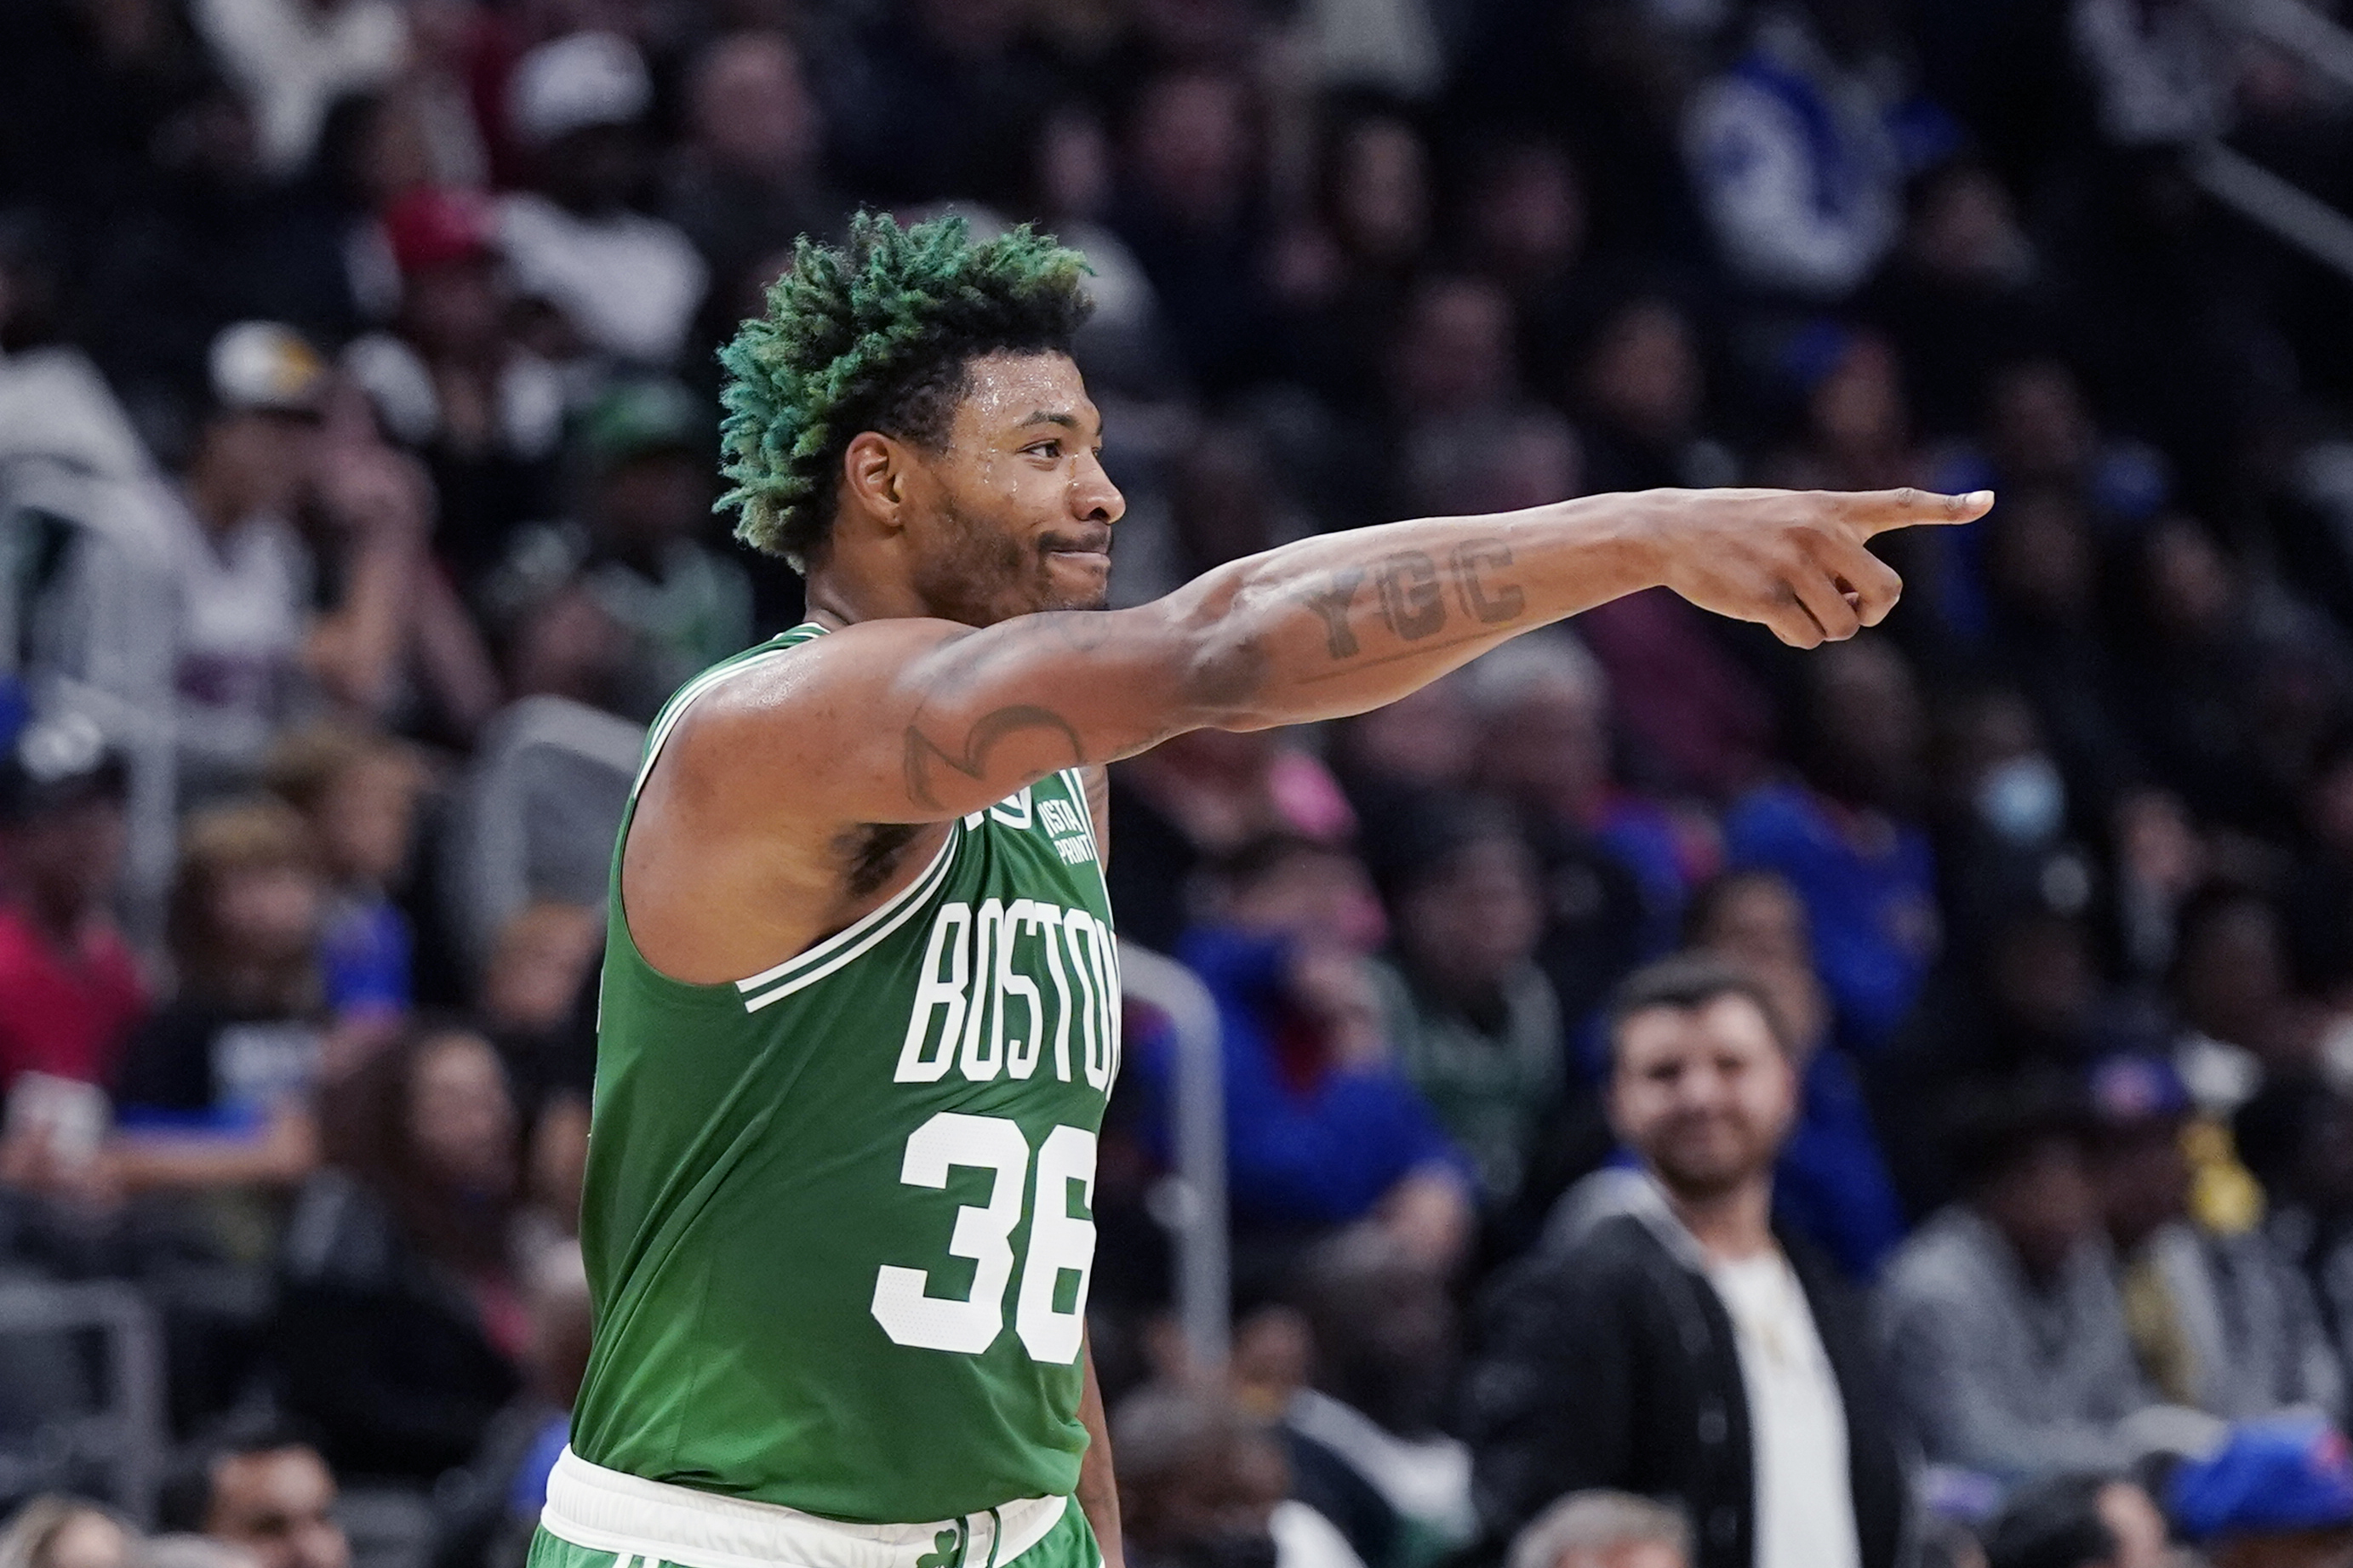 Boston Celtics' Marcus Smart suspended for low blow, out vs. Pistons